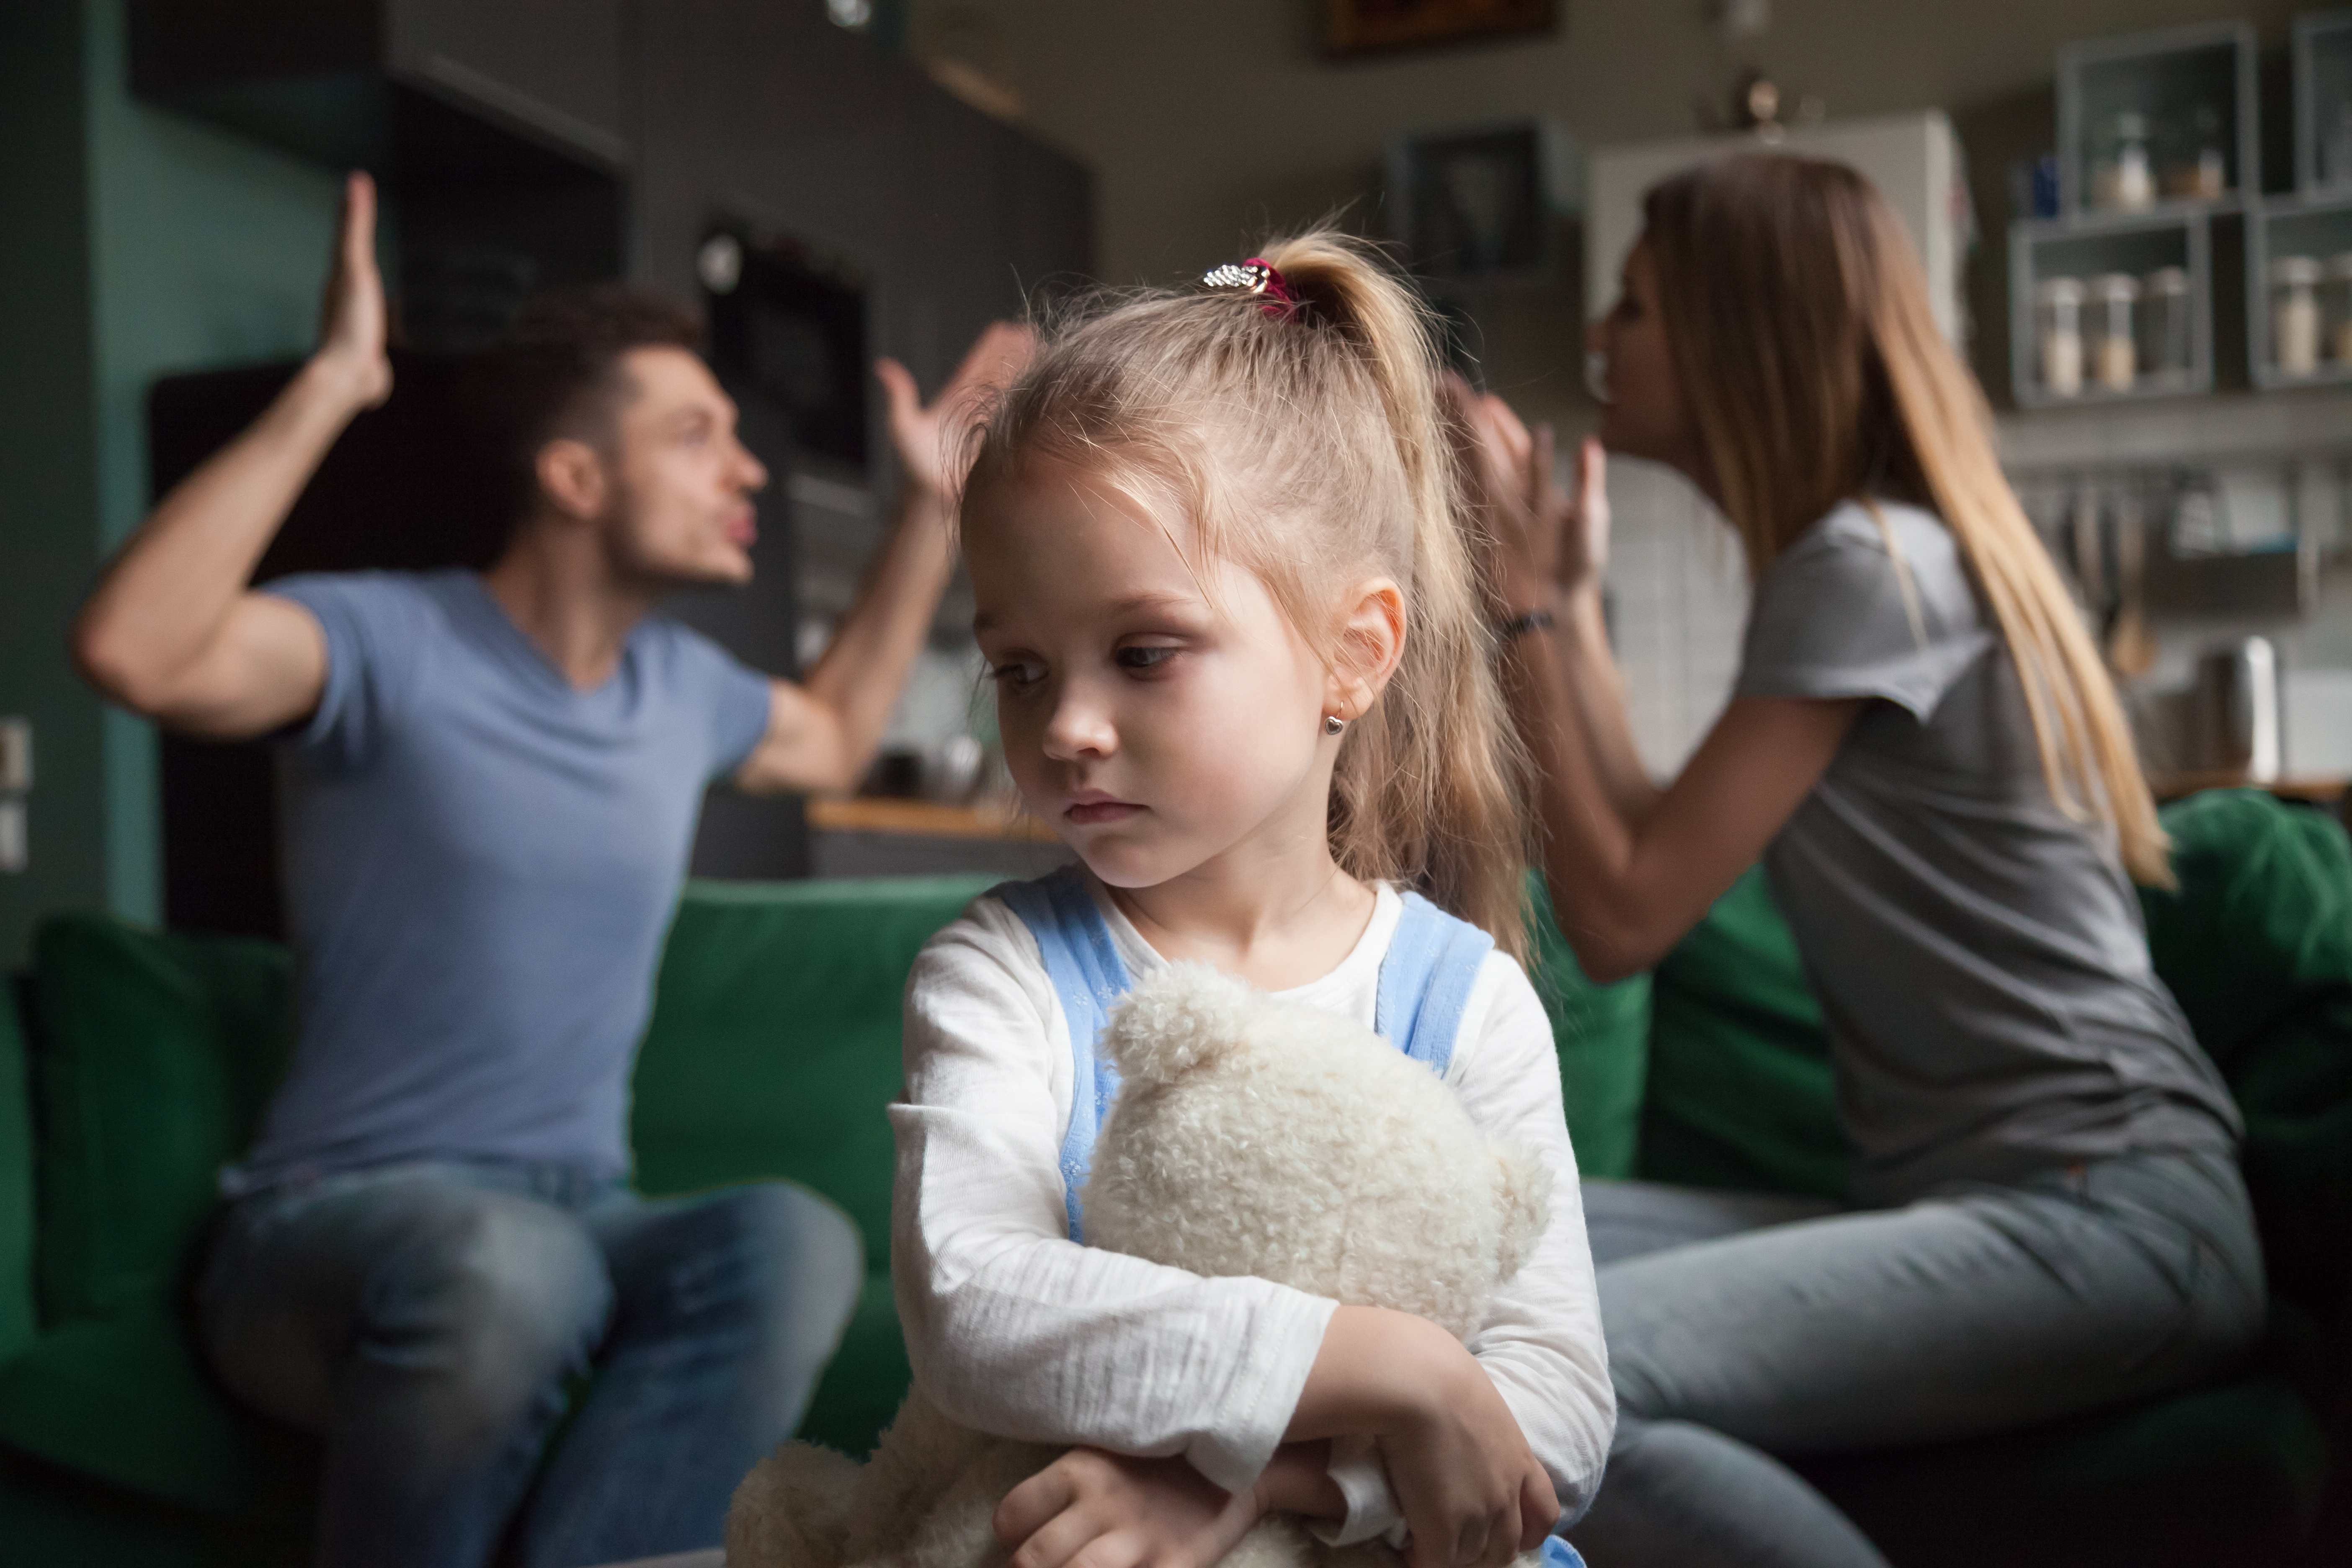 A little girl looking sad while a couple argues in the background | Source: Shutterstock